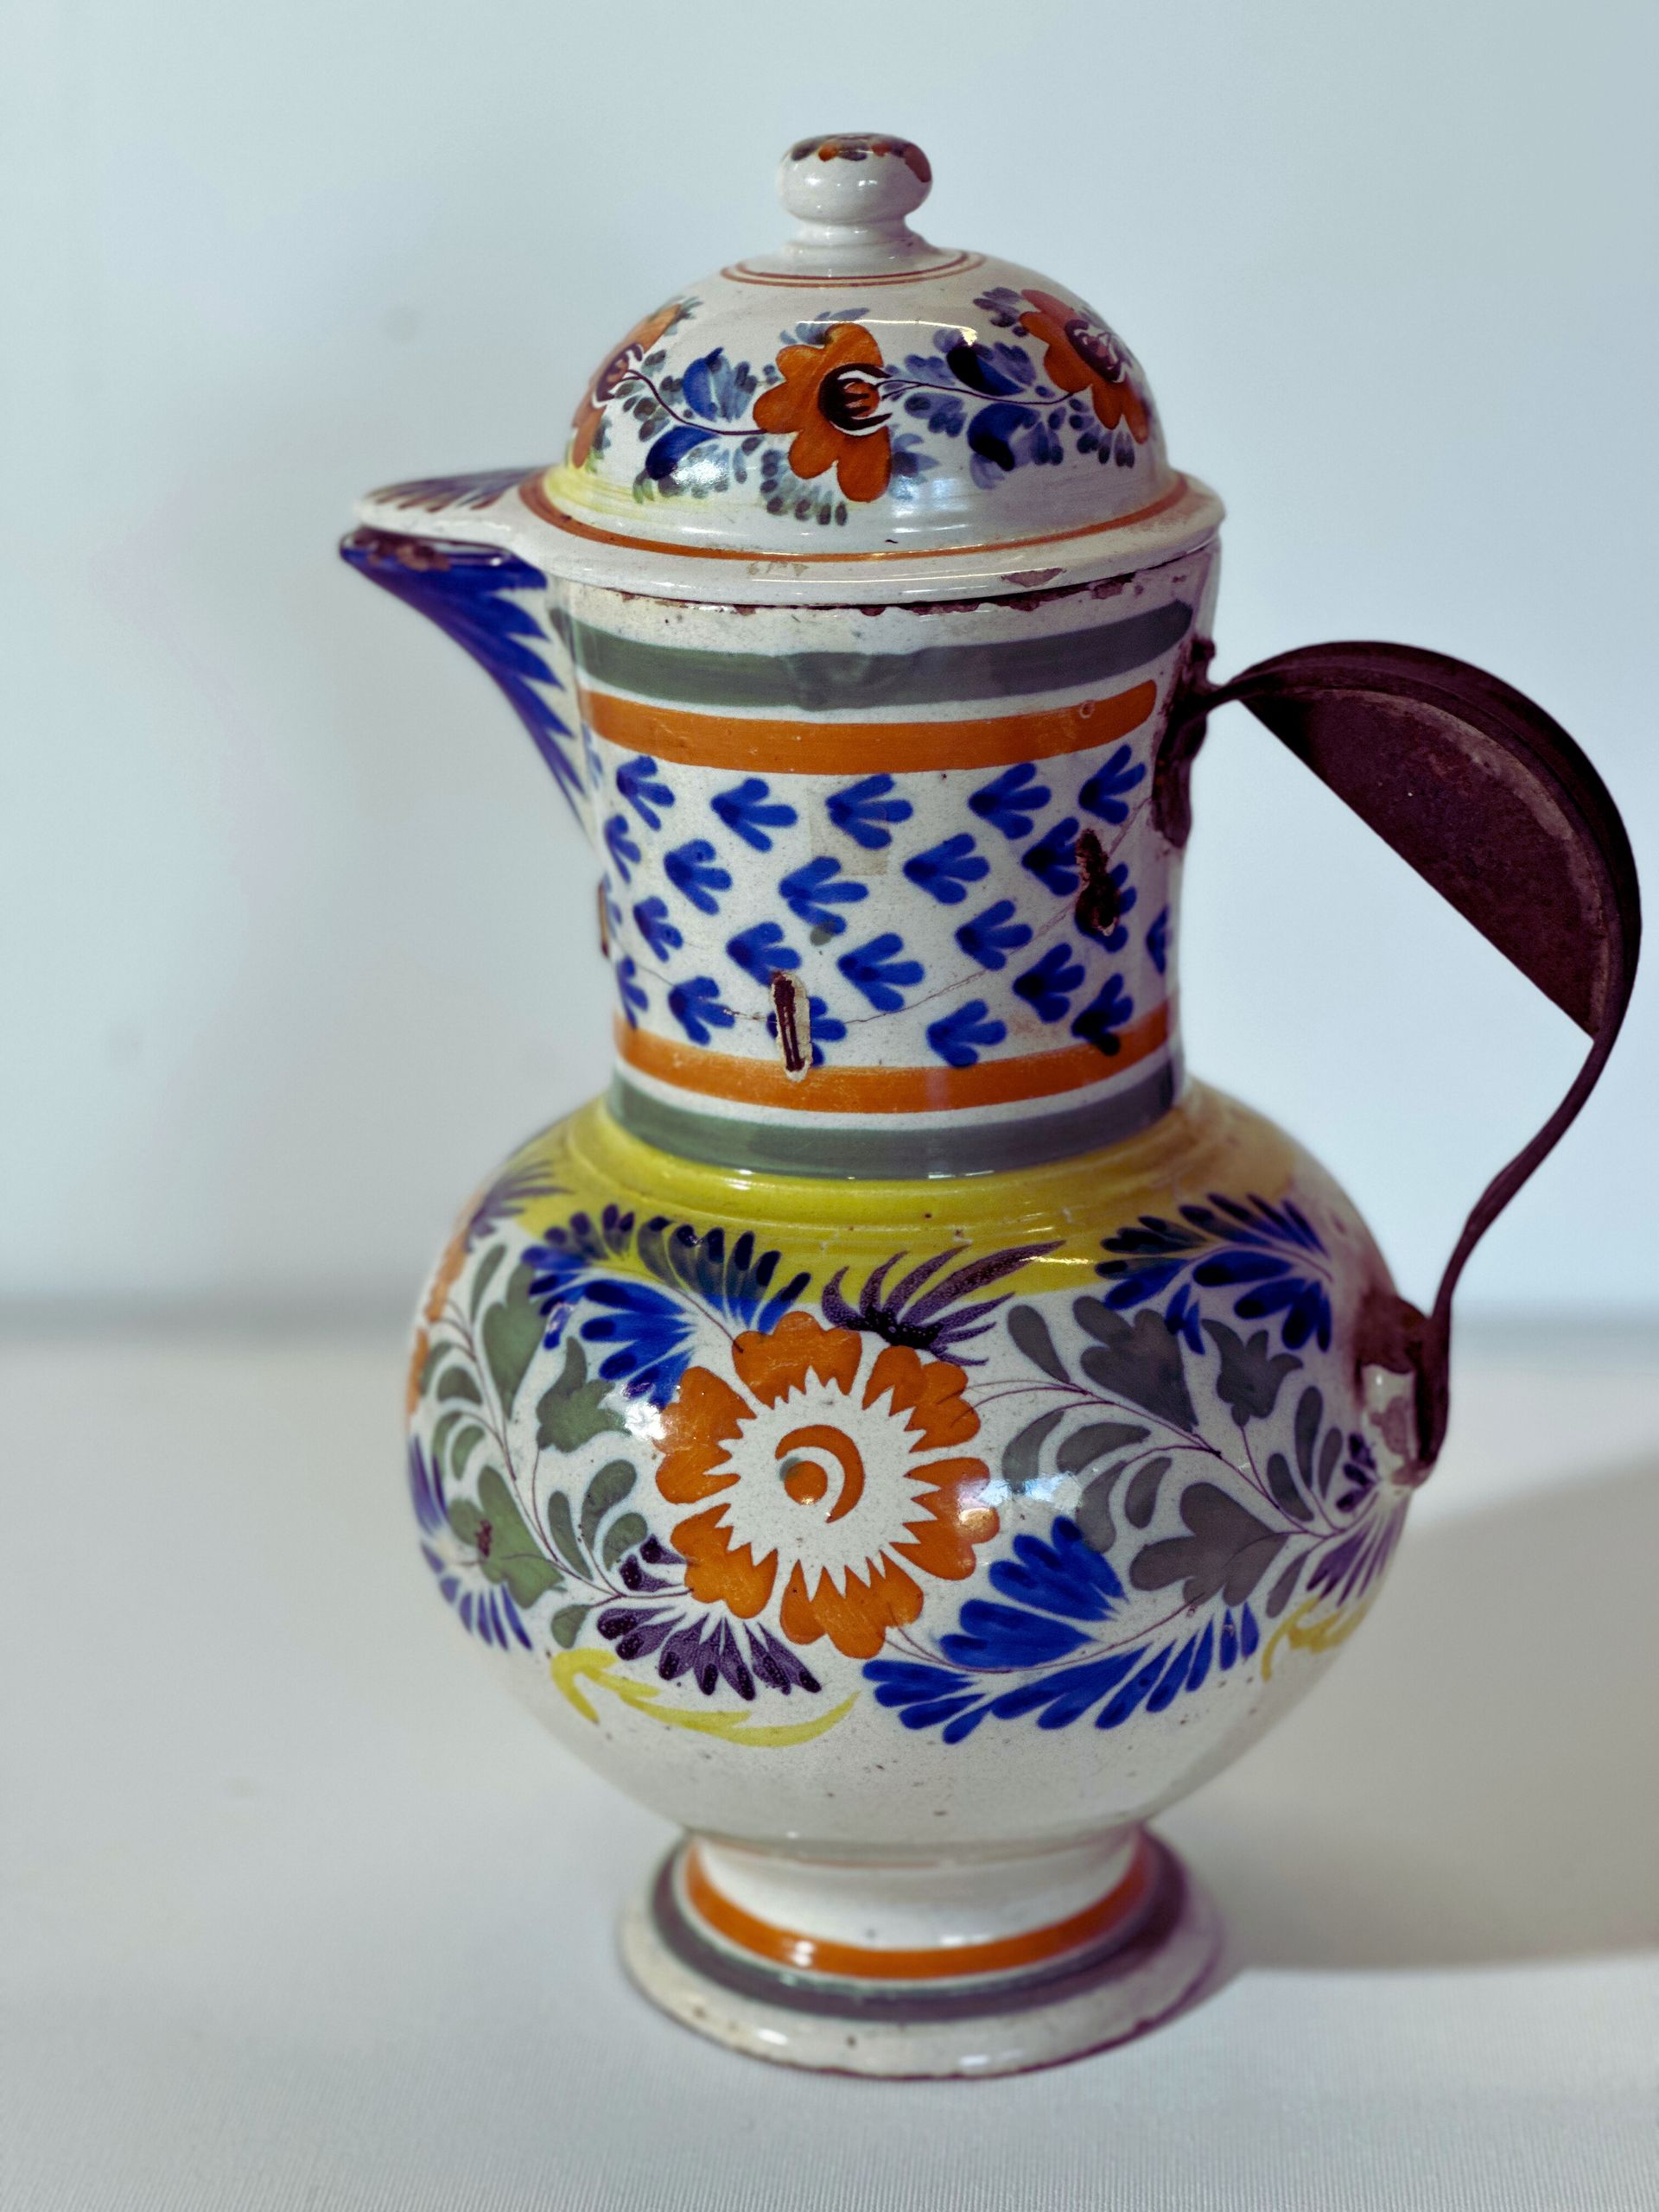 A ceramic pitcher with a floral design on it